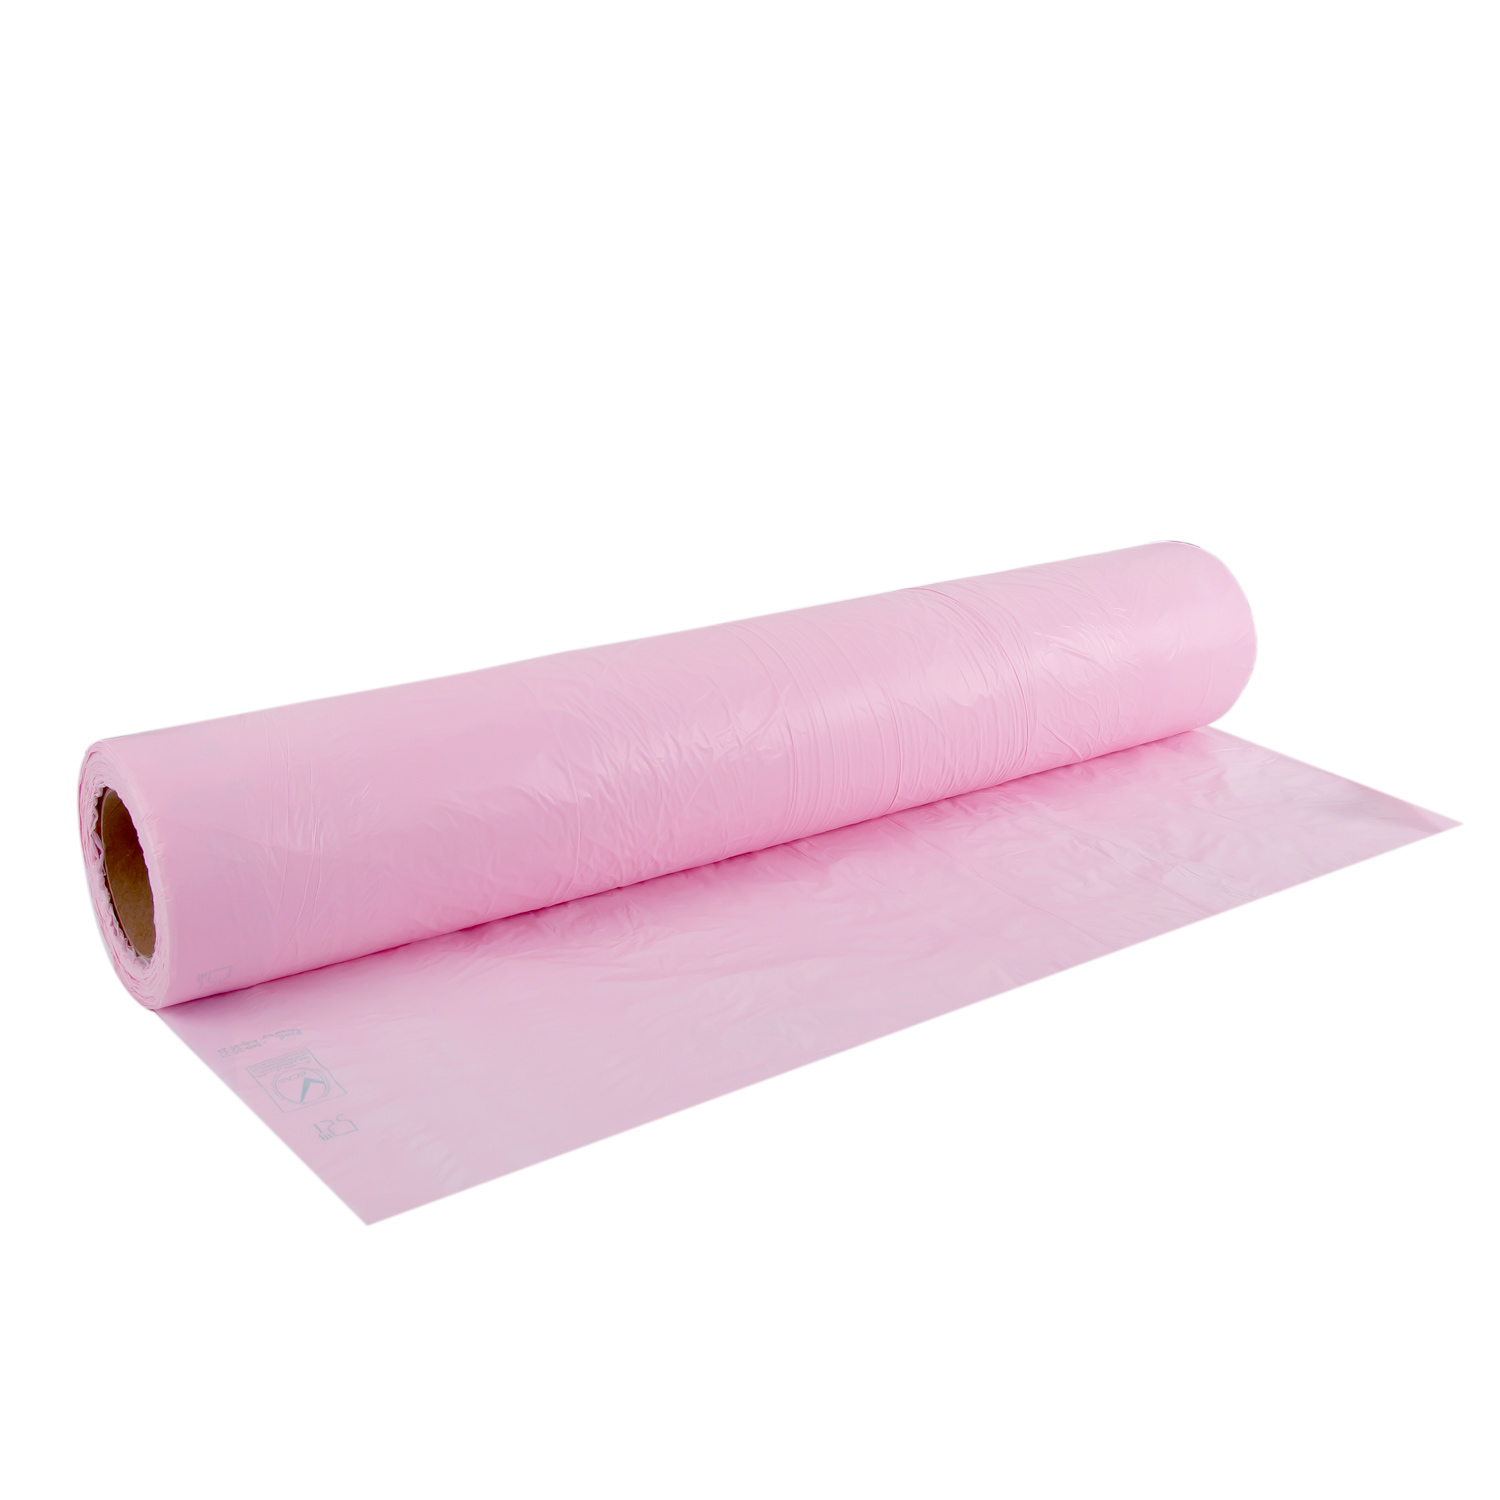 Table Cover Sofra Roll in Pink colour.